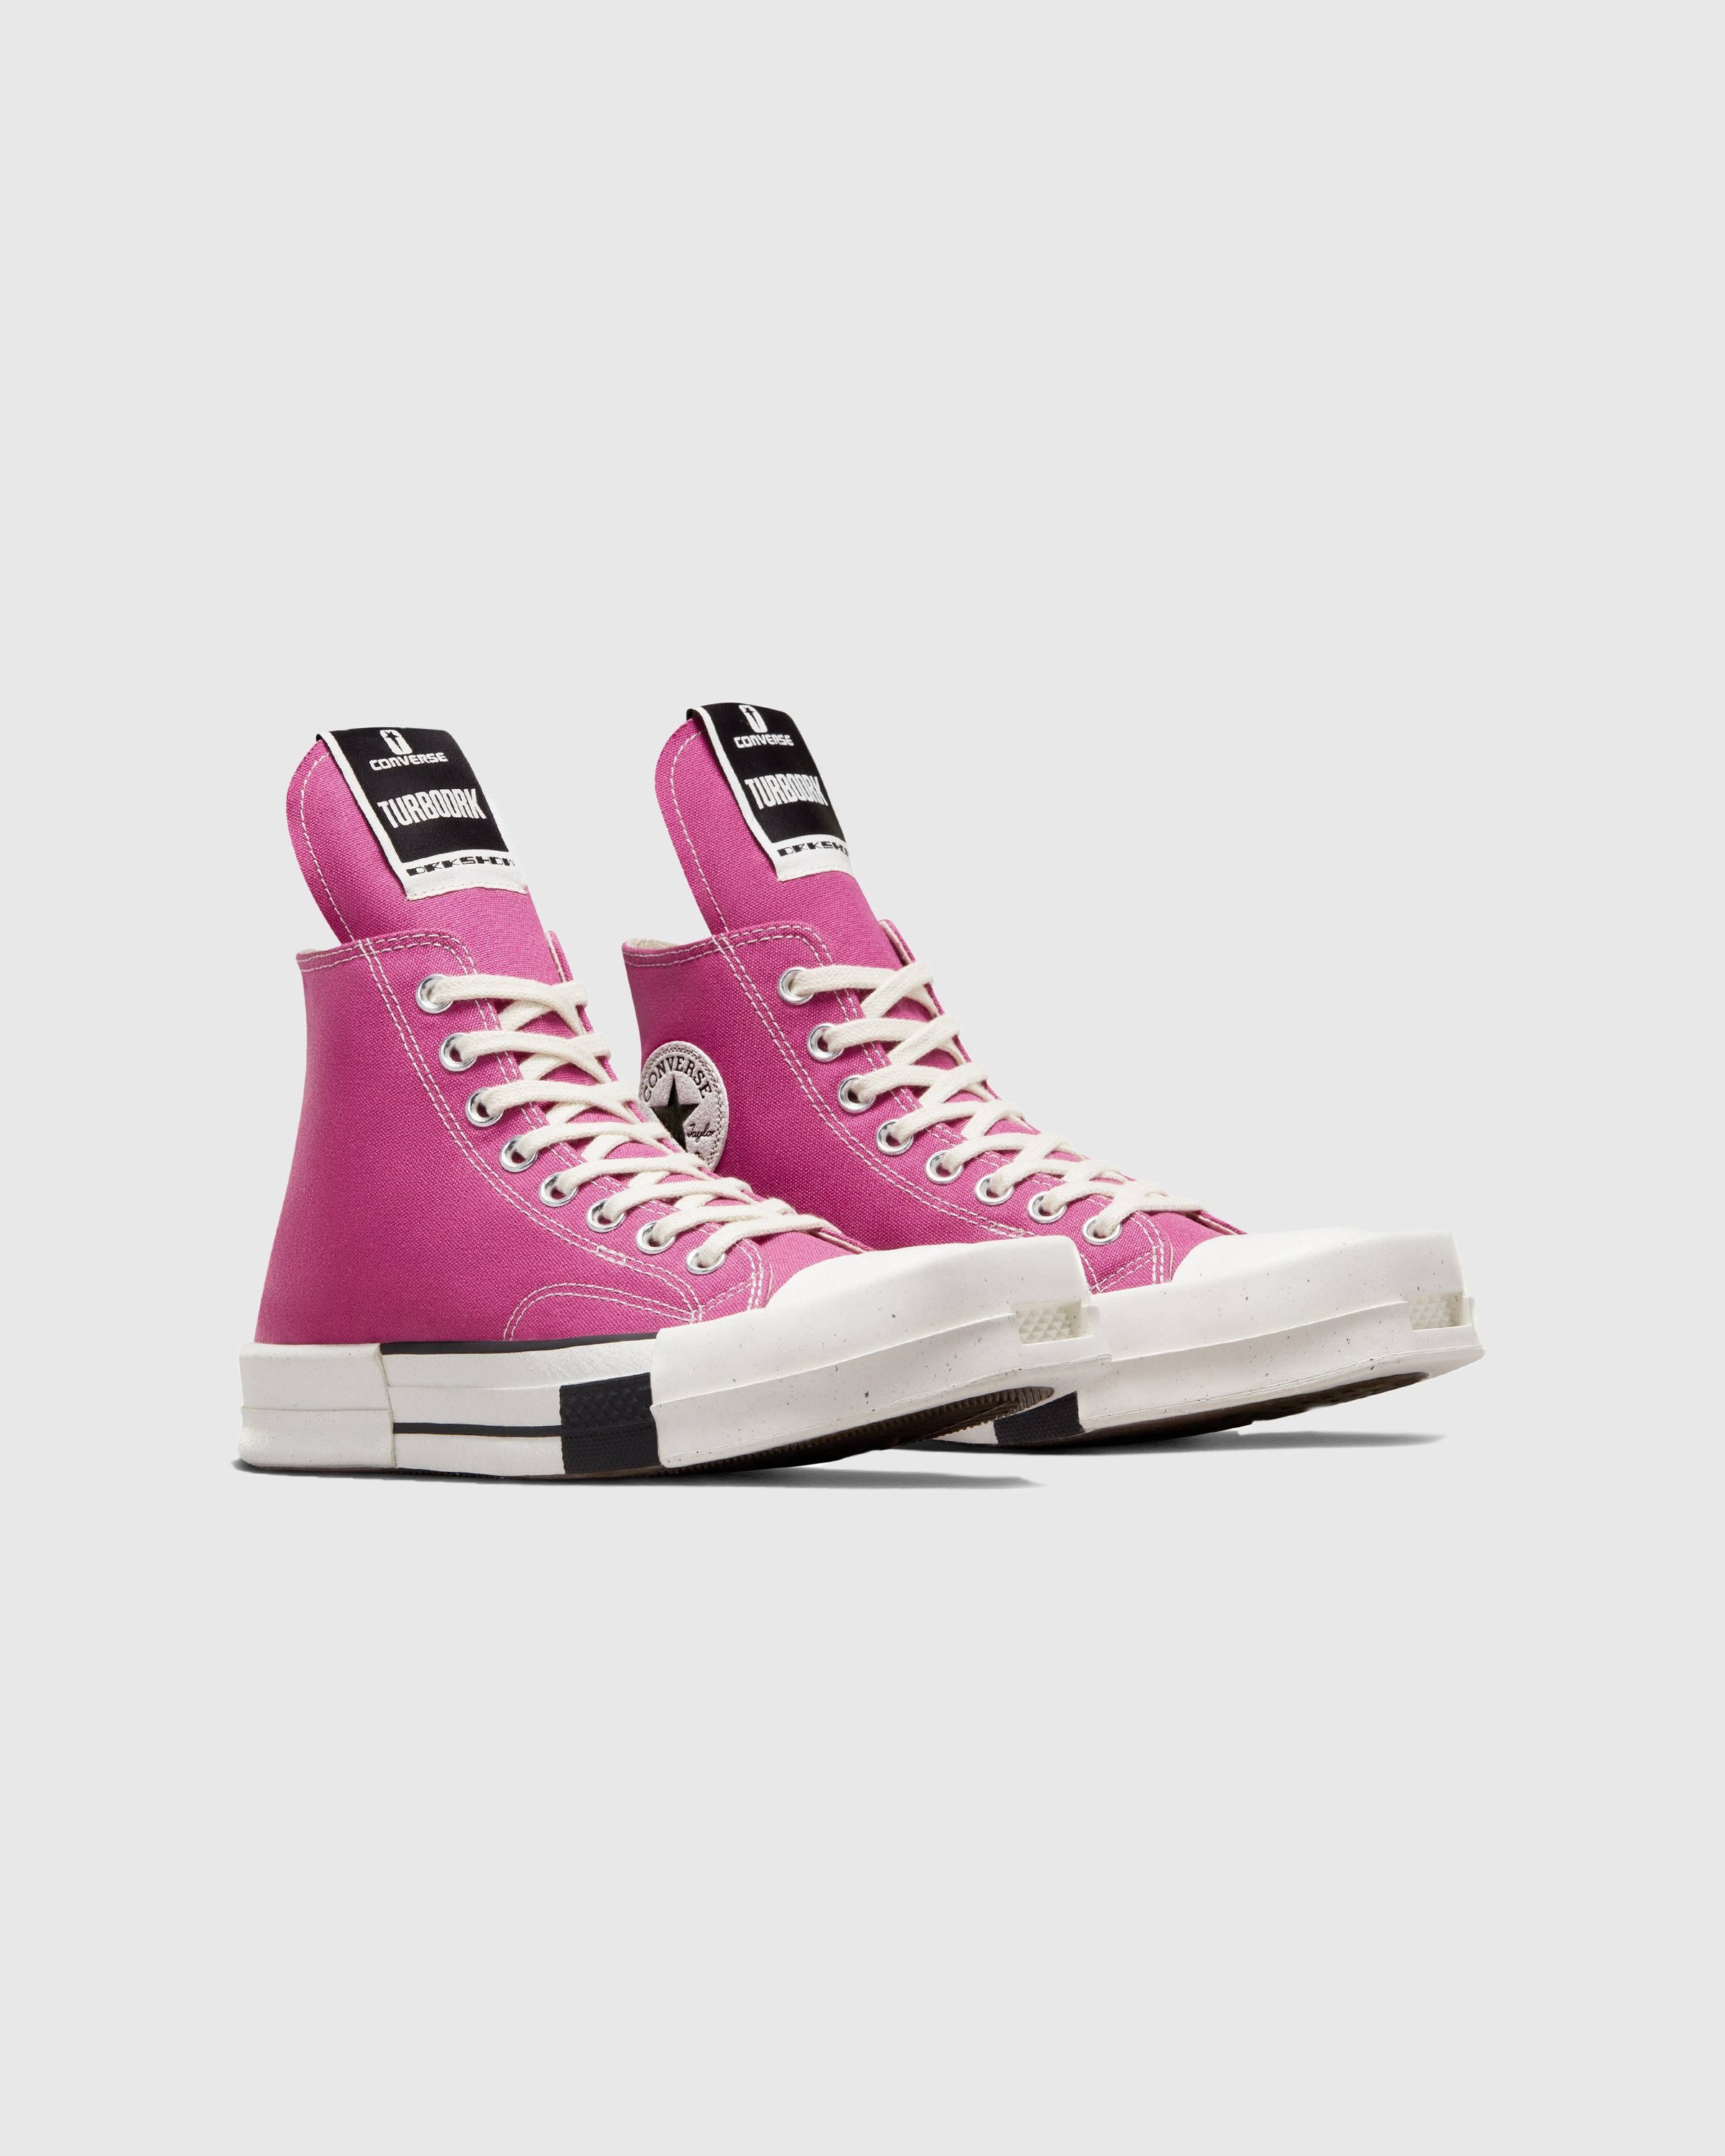 Converse x DRKSHDW – TURBODRK Chuck 70 Laceless Hi Pink - High Top Sneakers - Pink - Image 5